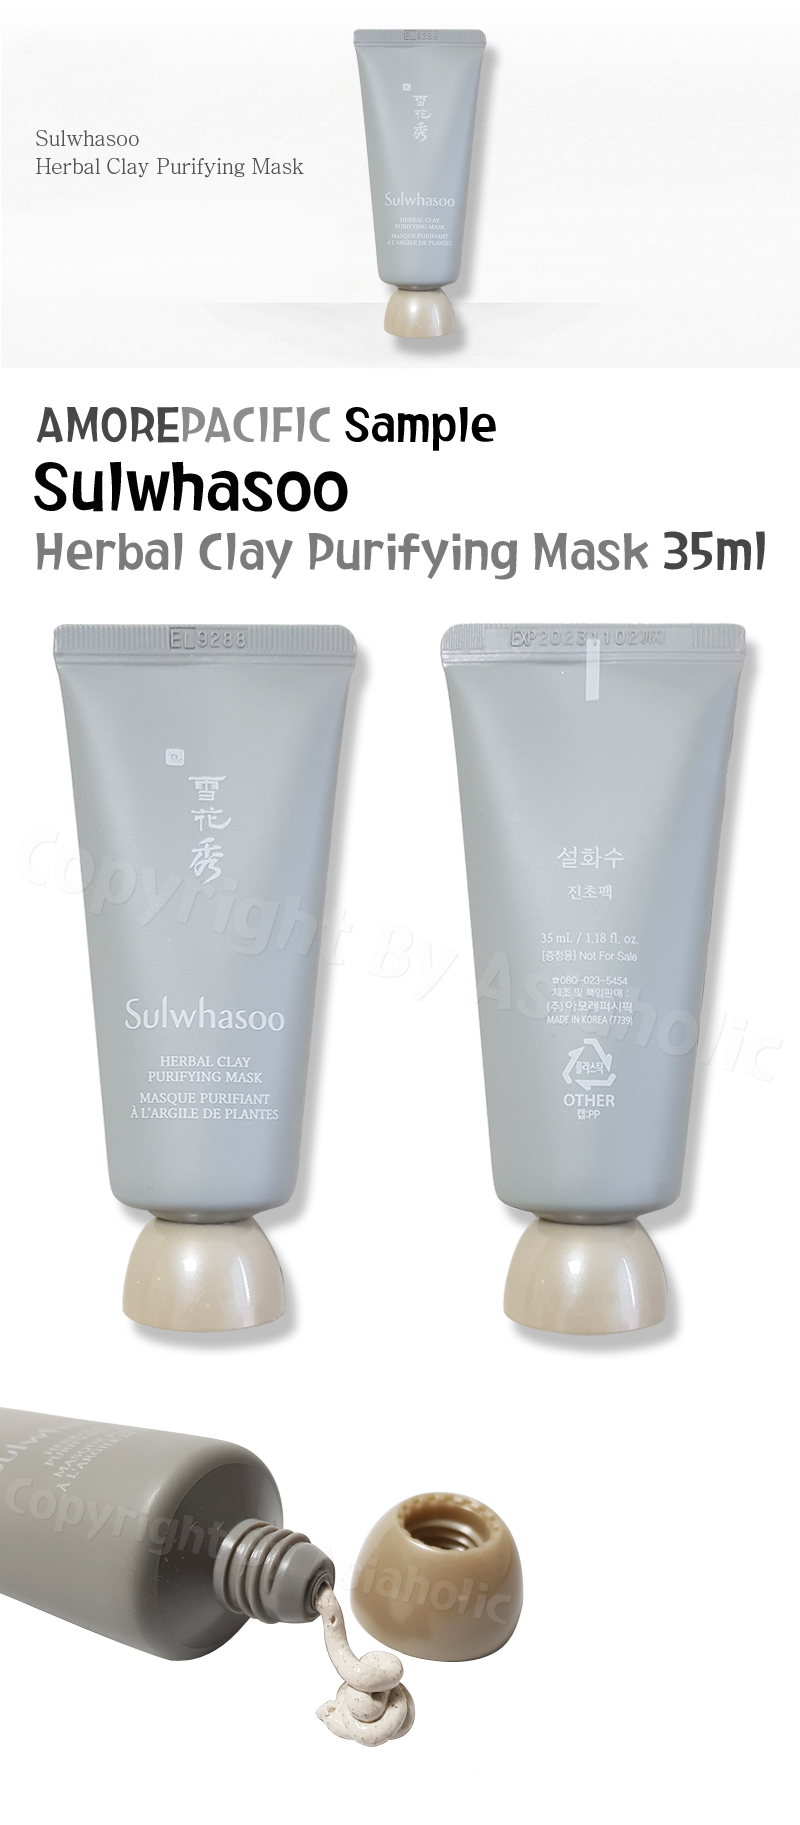 Sulwhasoo Herbal Clay Purifying Mask 35ml x 1pcs (35ml) Sample Newest Version